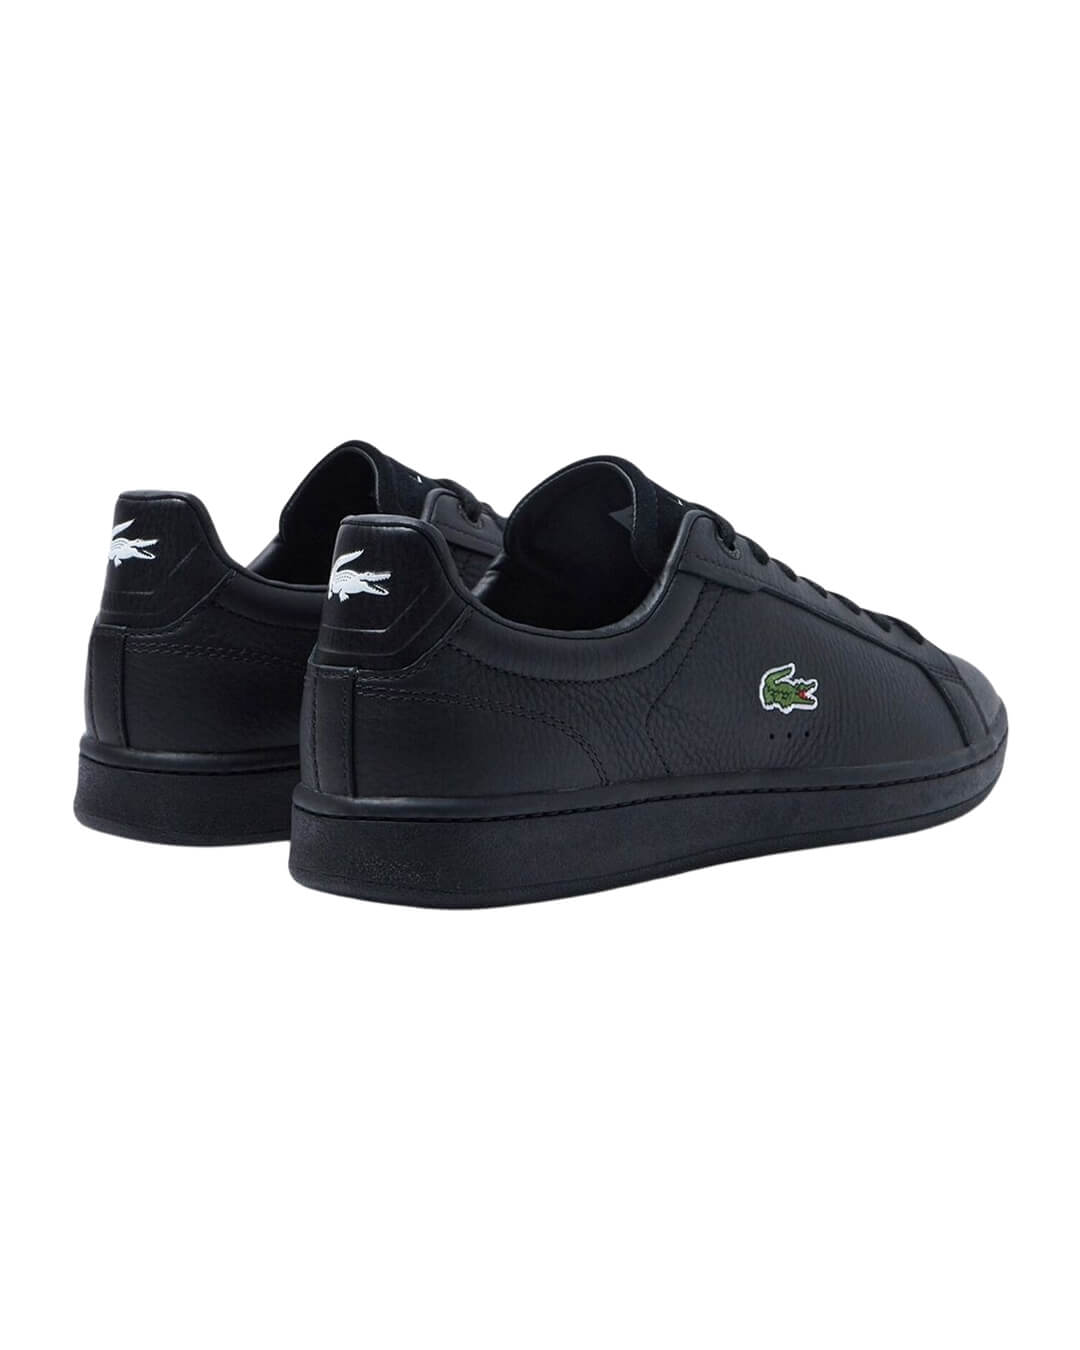 Lacoste Shoes Carnaby Pro 222 2 Sma Black/Black